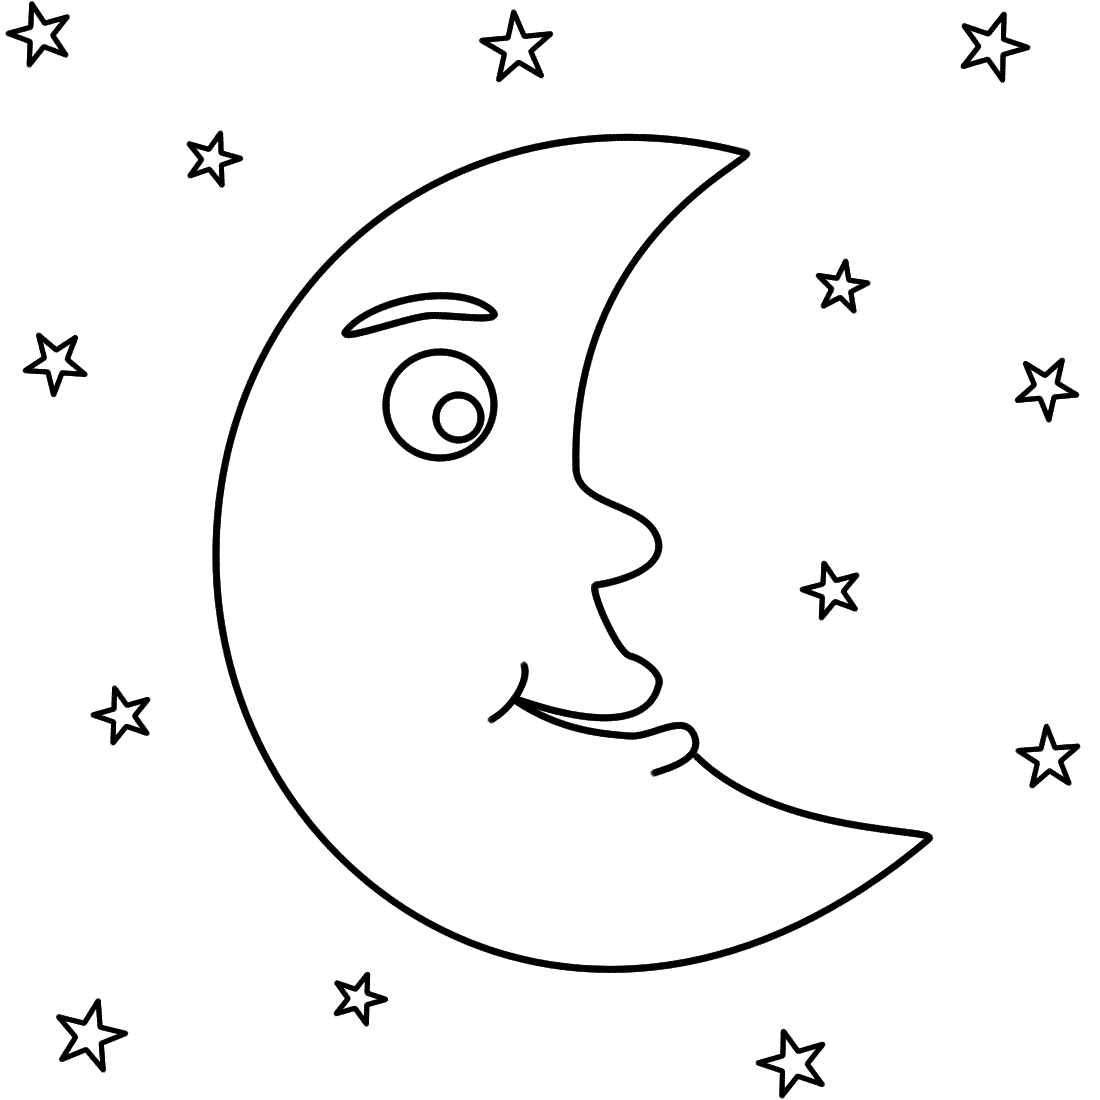 Crescent Moon with Stars - Coloring Page (Space)